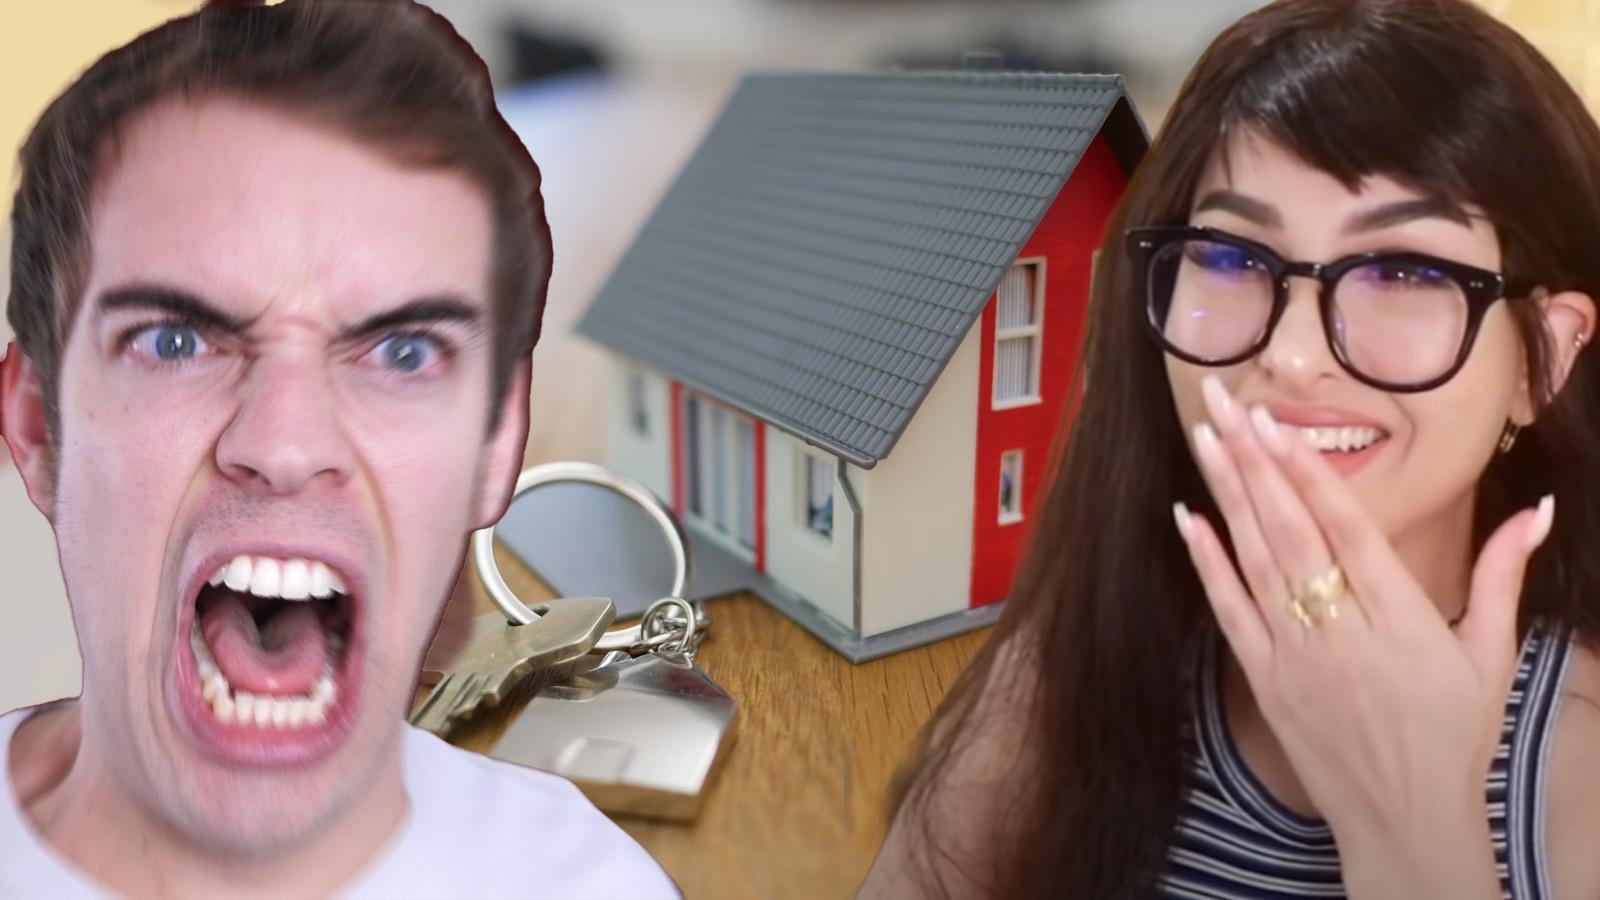 Jacksfilms calls for YouTube to demonetize Sssniperwolf after Instagram doxxing